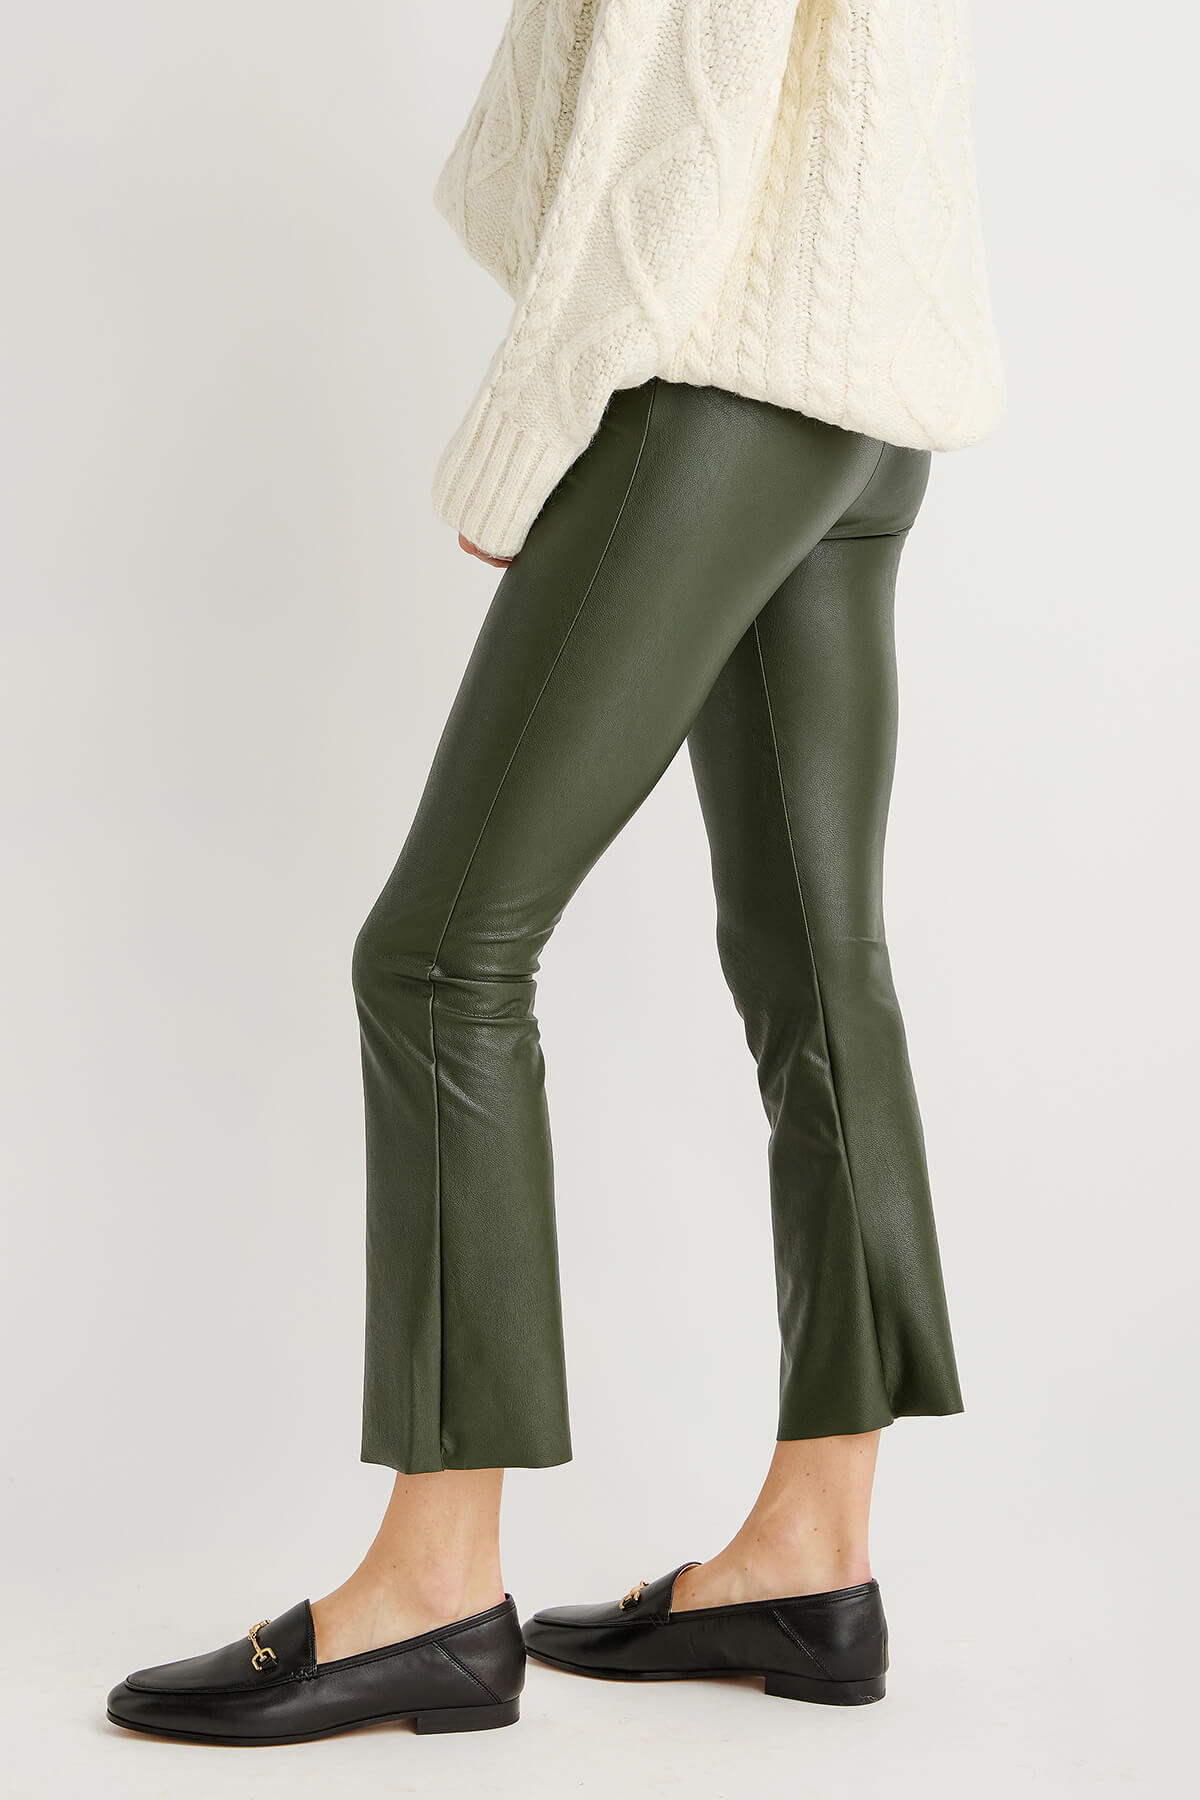 COMMANDO - FAUX LEATHER CROP FLARE LEGGING – Robert Simmonds Clothing